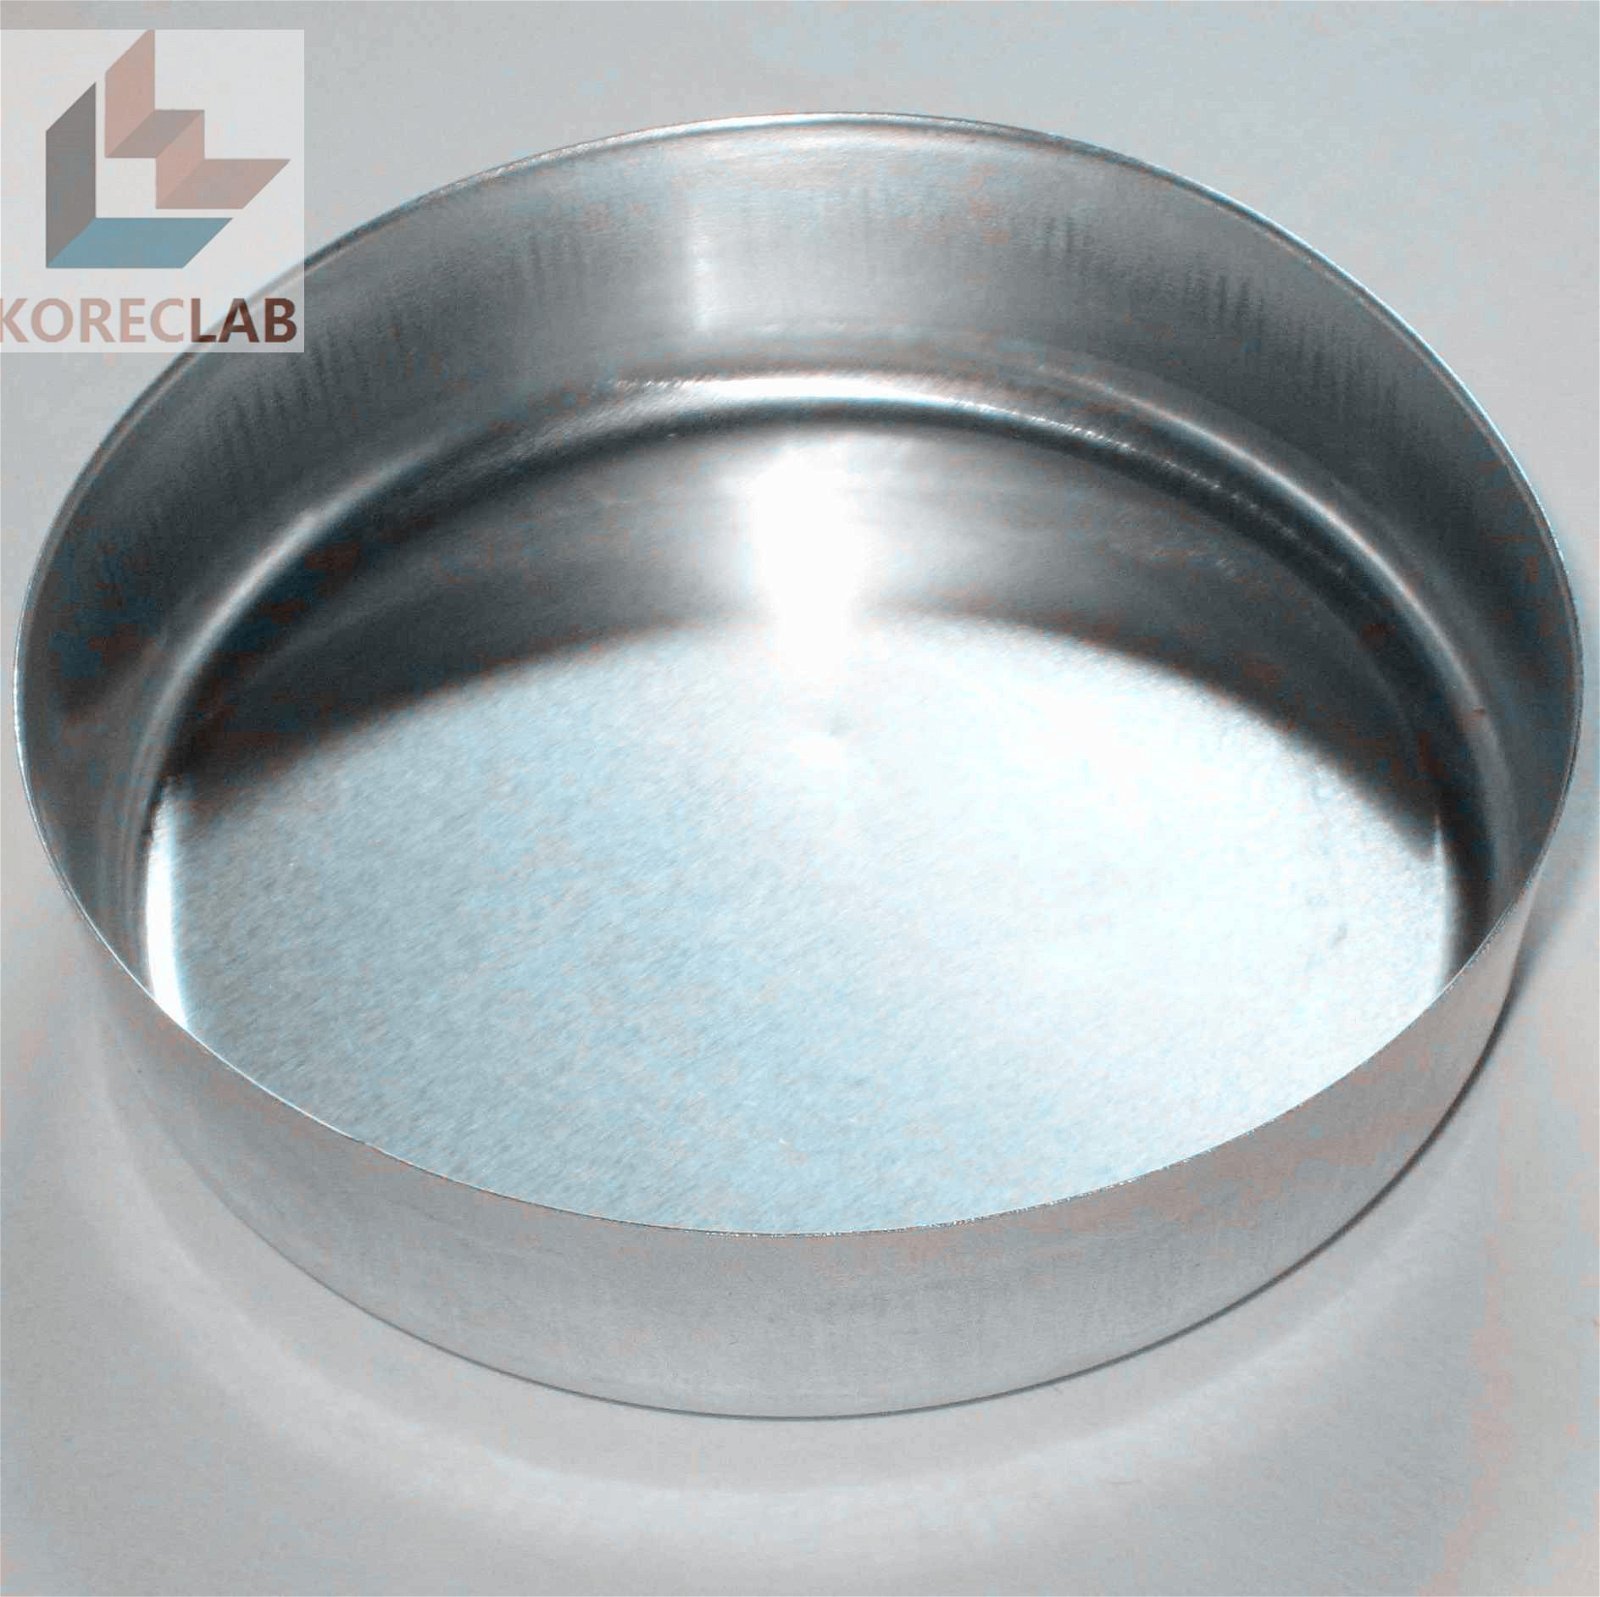 70ml Aluminum Lab supply Smooth-Walled Weighing Boat or Dish 2